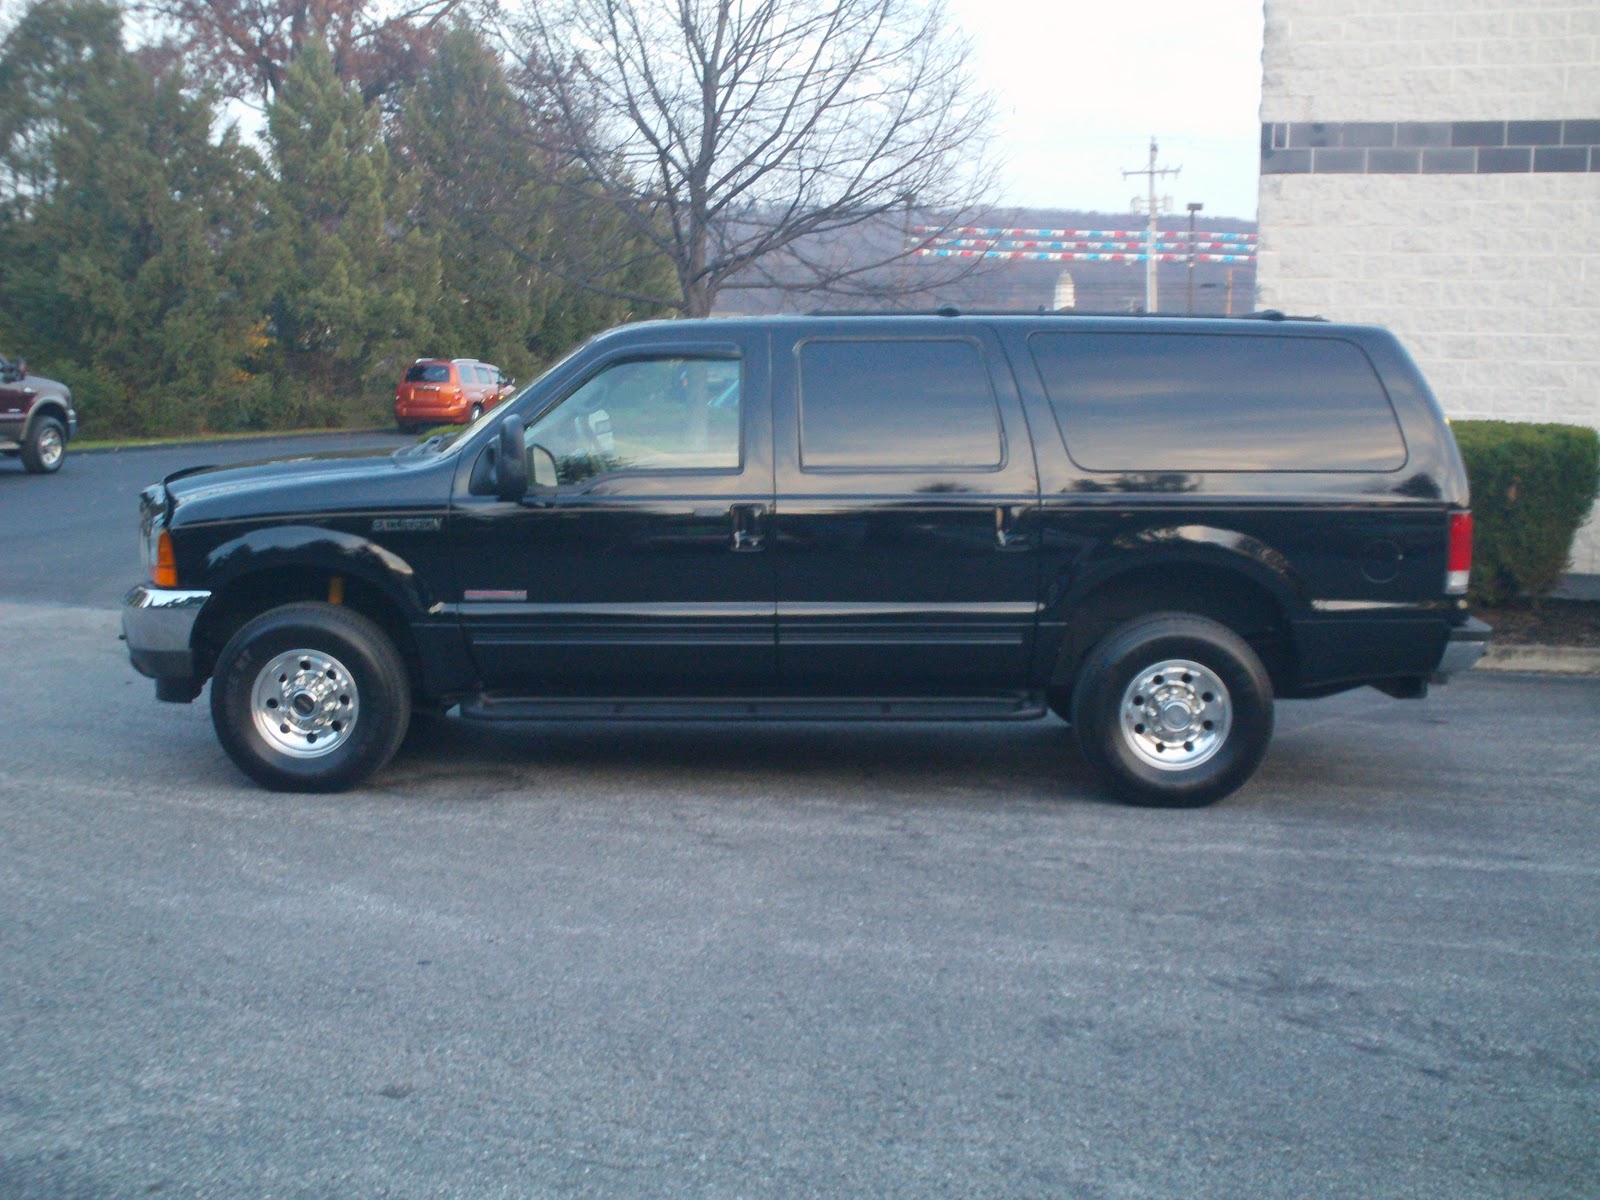 Manchester Motors: 2001 Ford Excursion Diesel